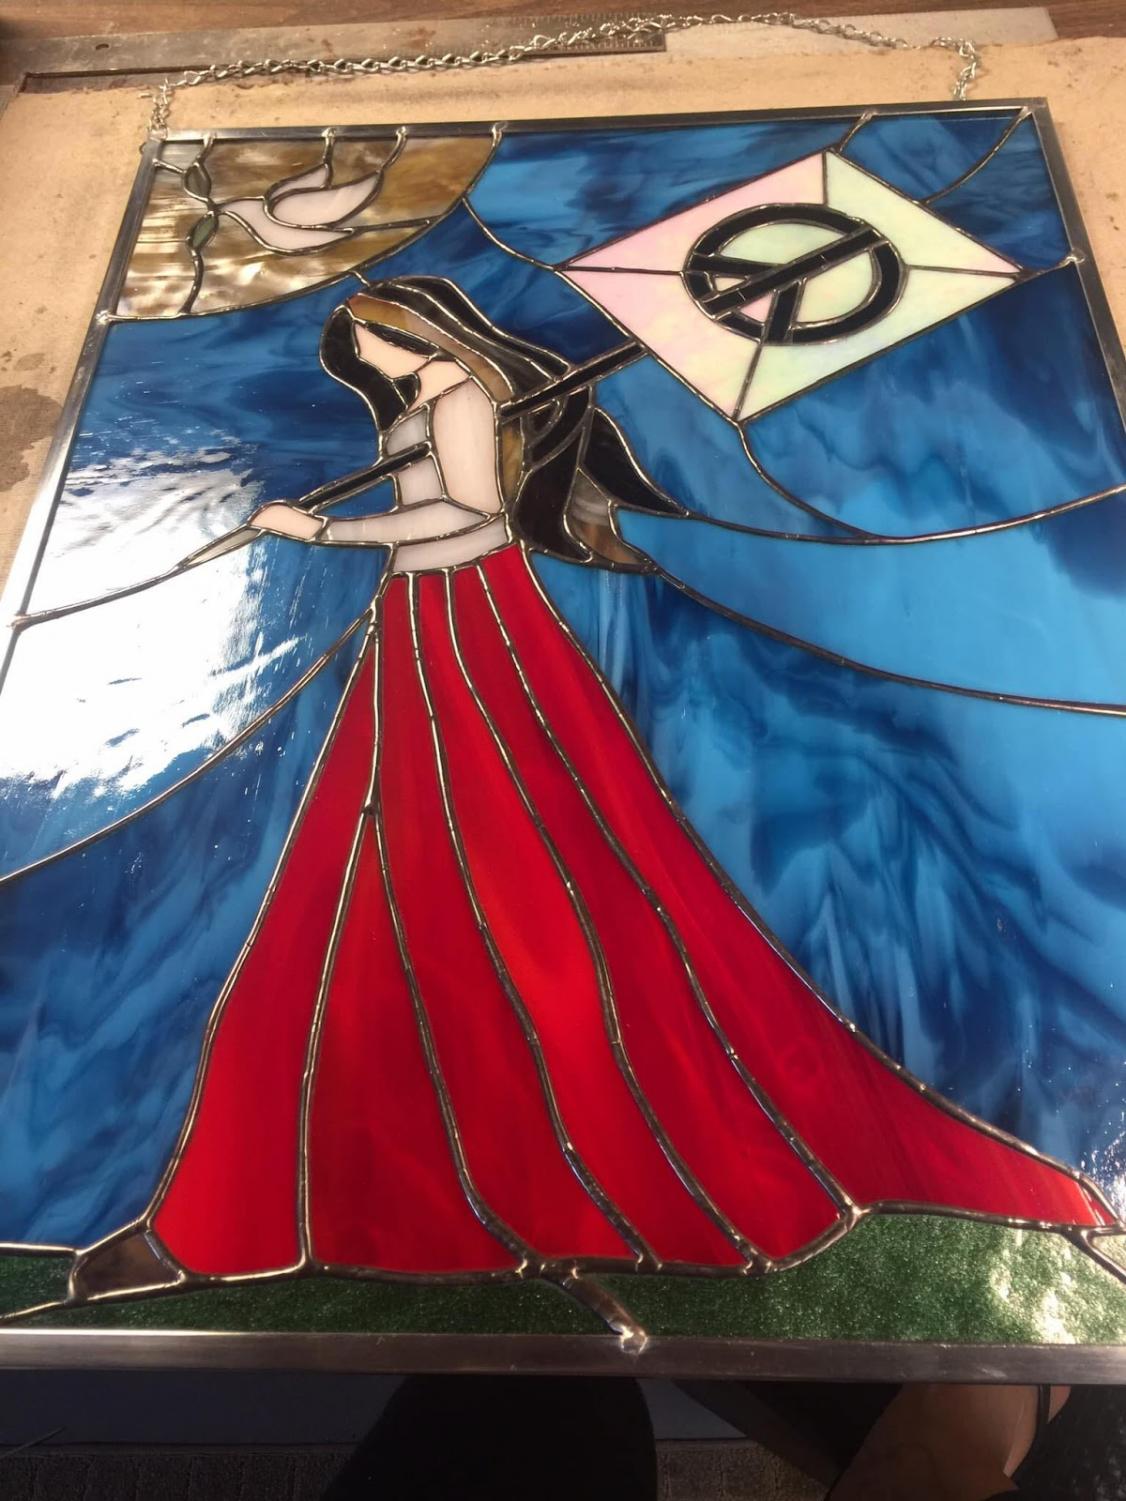 Some of Dr. Zaremba’s stained glass work. Photos courtesy of Stacey Zaremba.